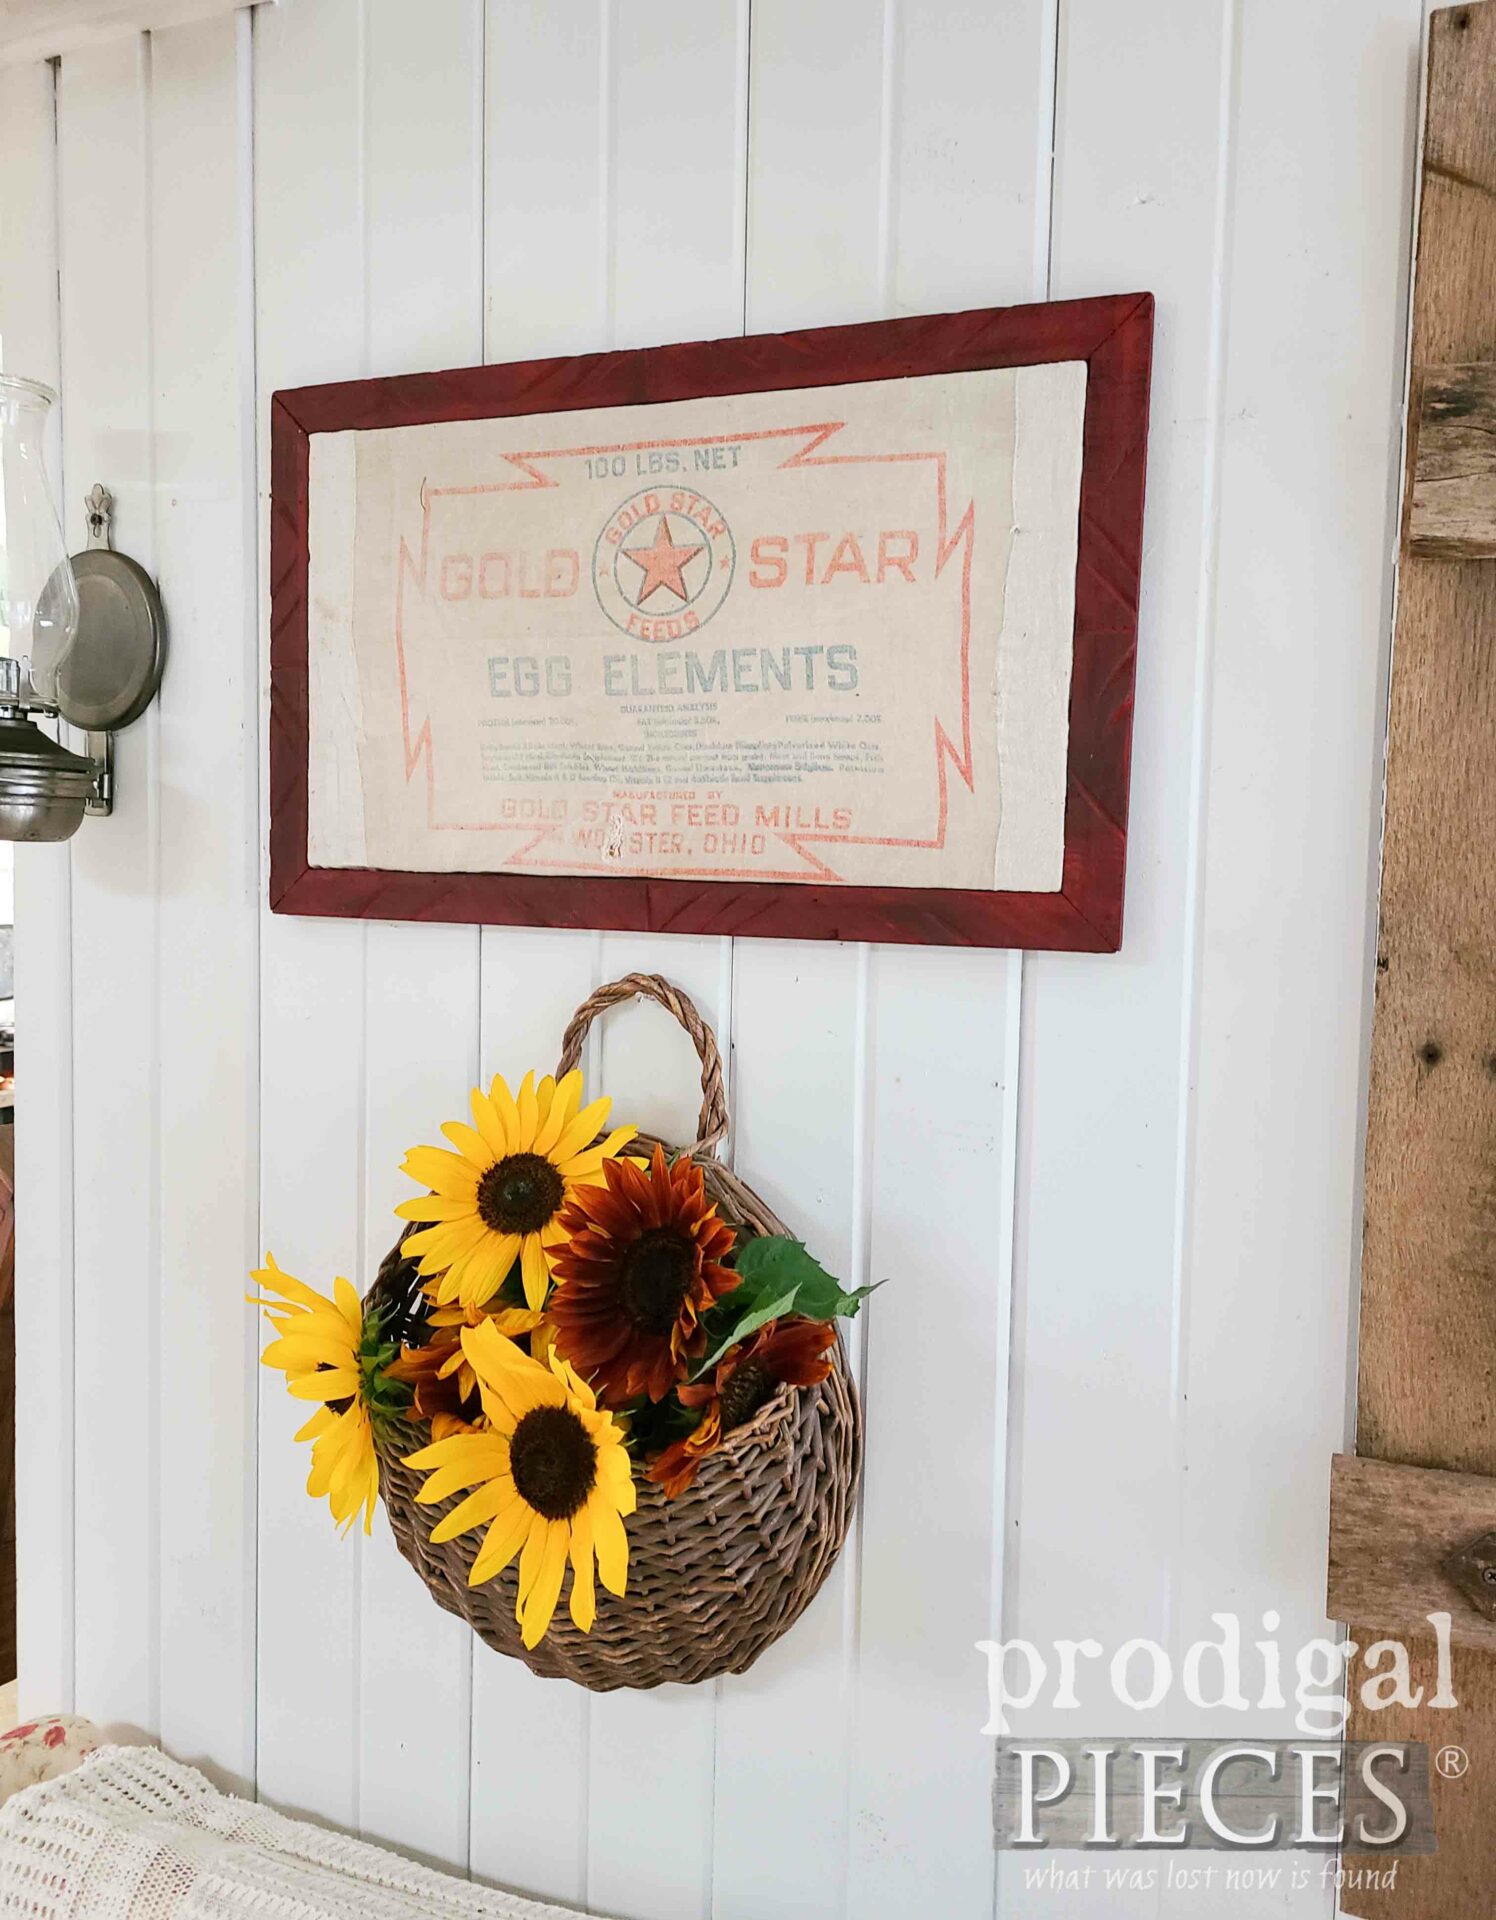 Upcycled Feed Sack in Thrifted Frame by Larissa of Prodigal Pieces | prodigalpieces.com #prodigalpieces #thrifted #upcycled #diy